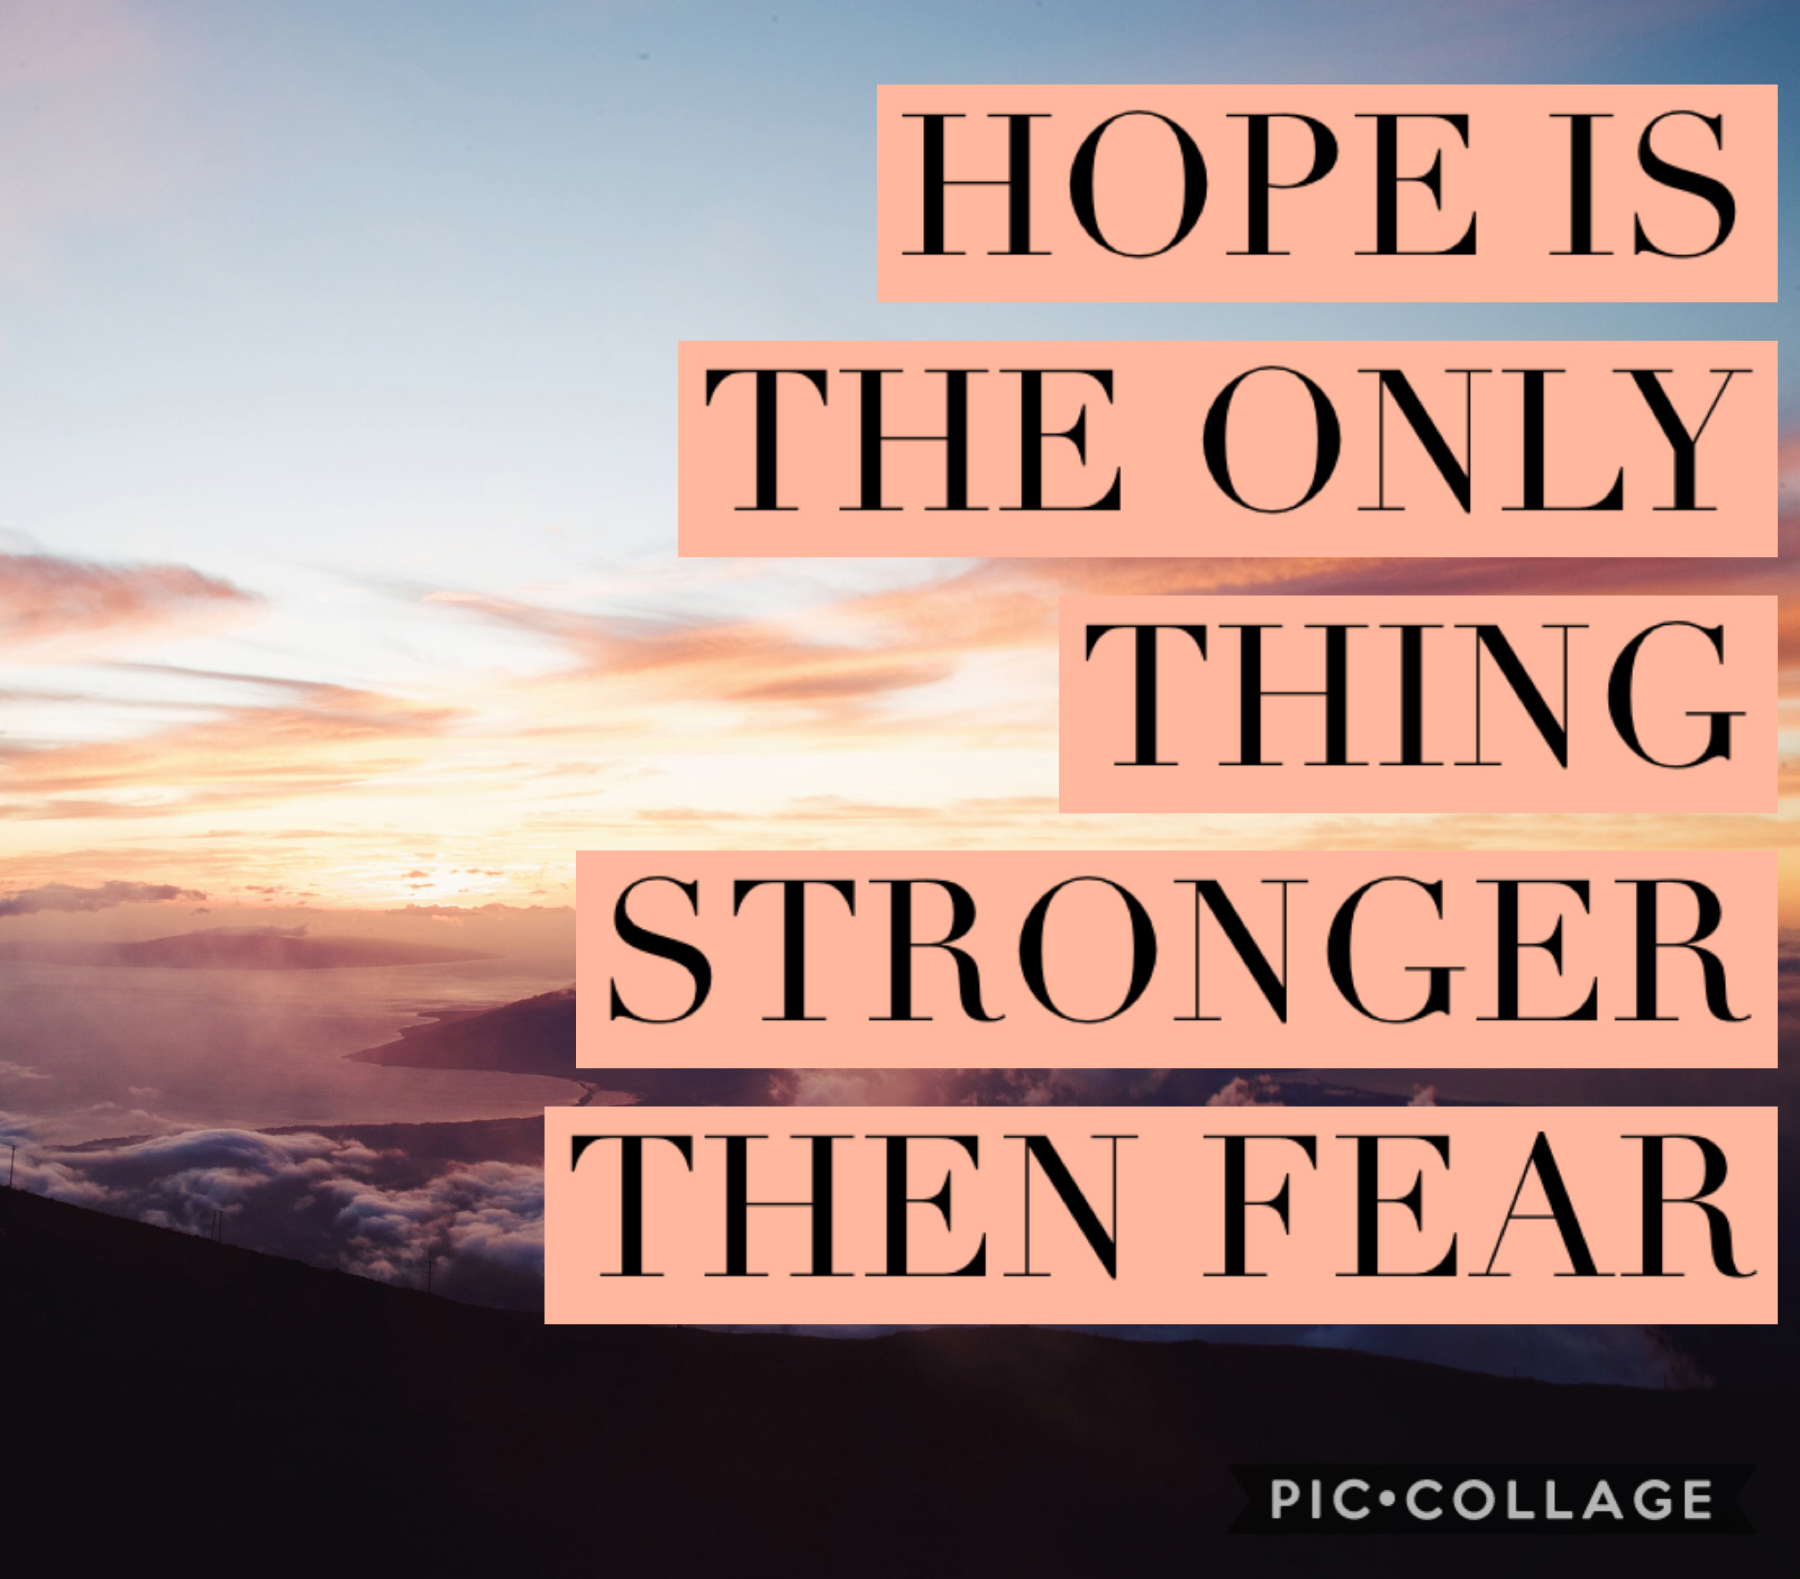 Hope is the only thing stronger then fear